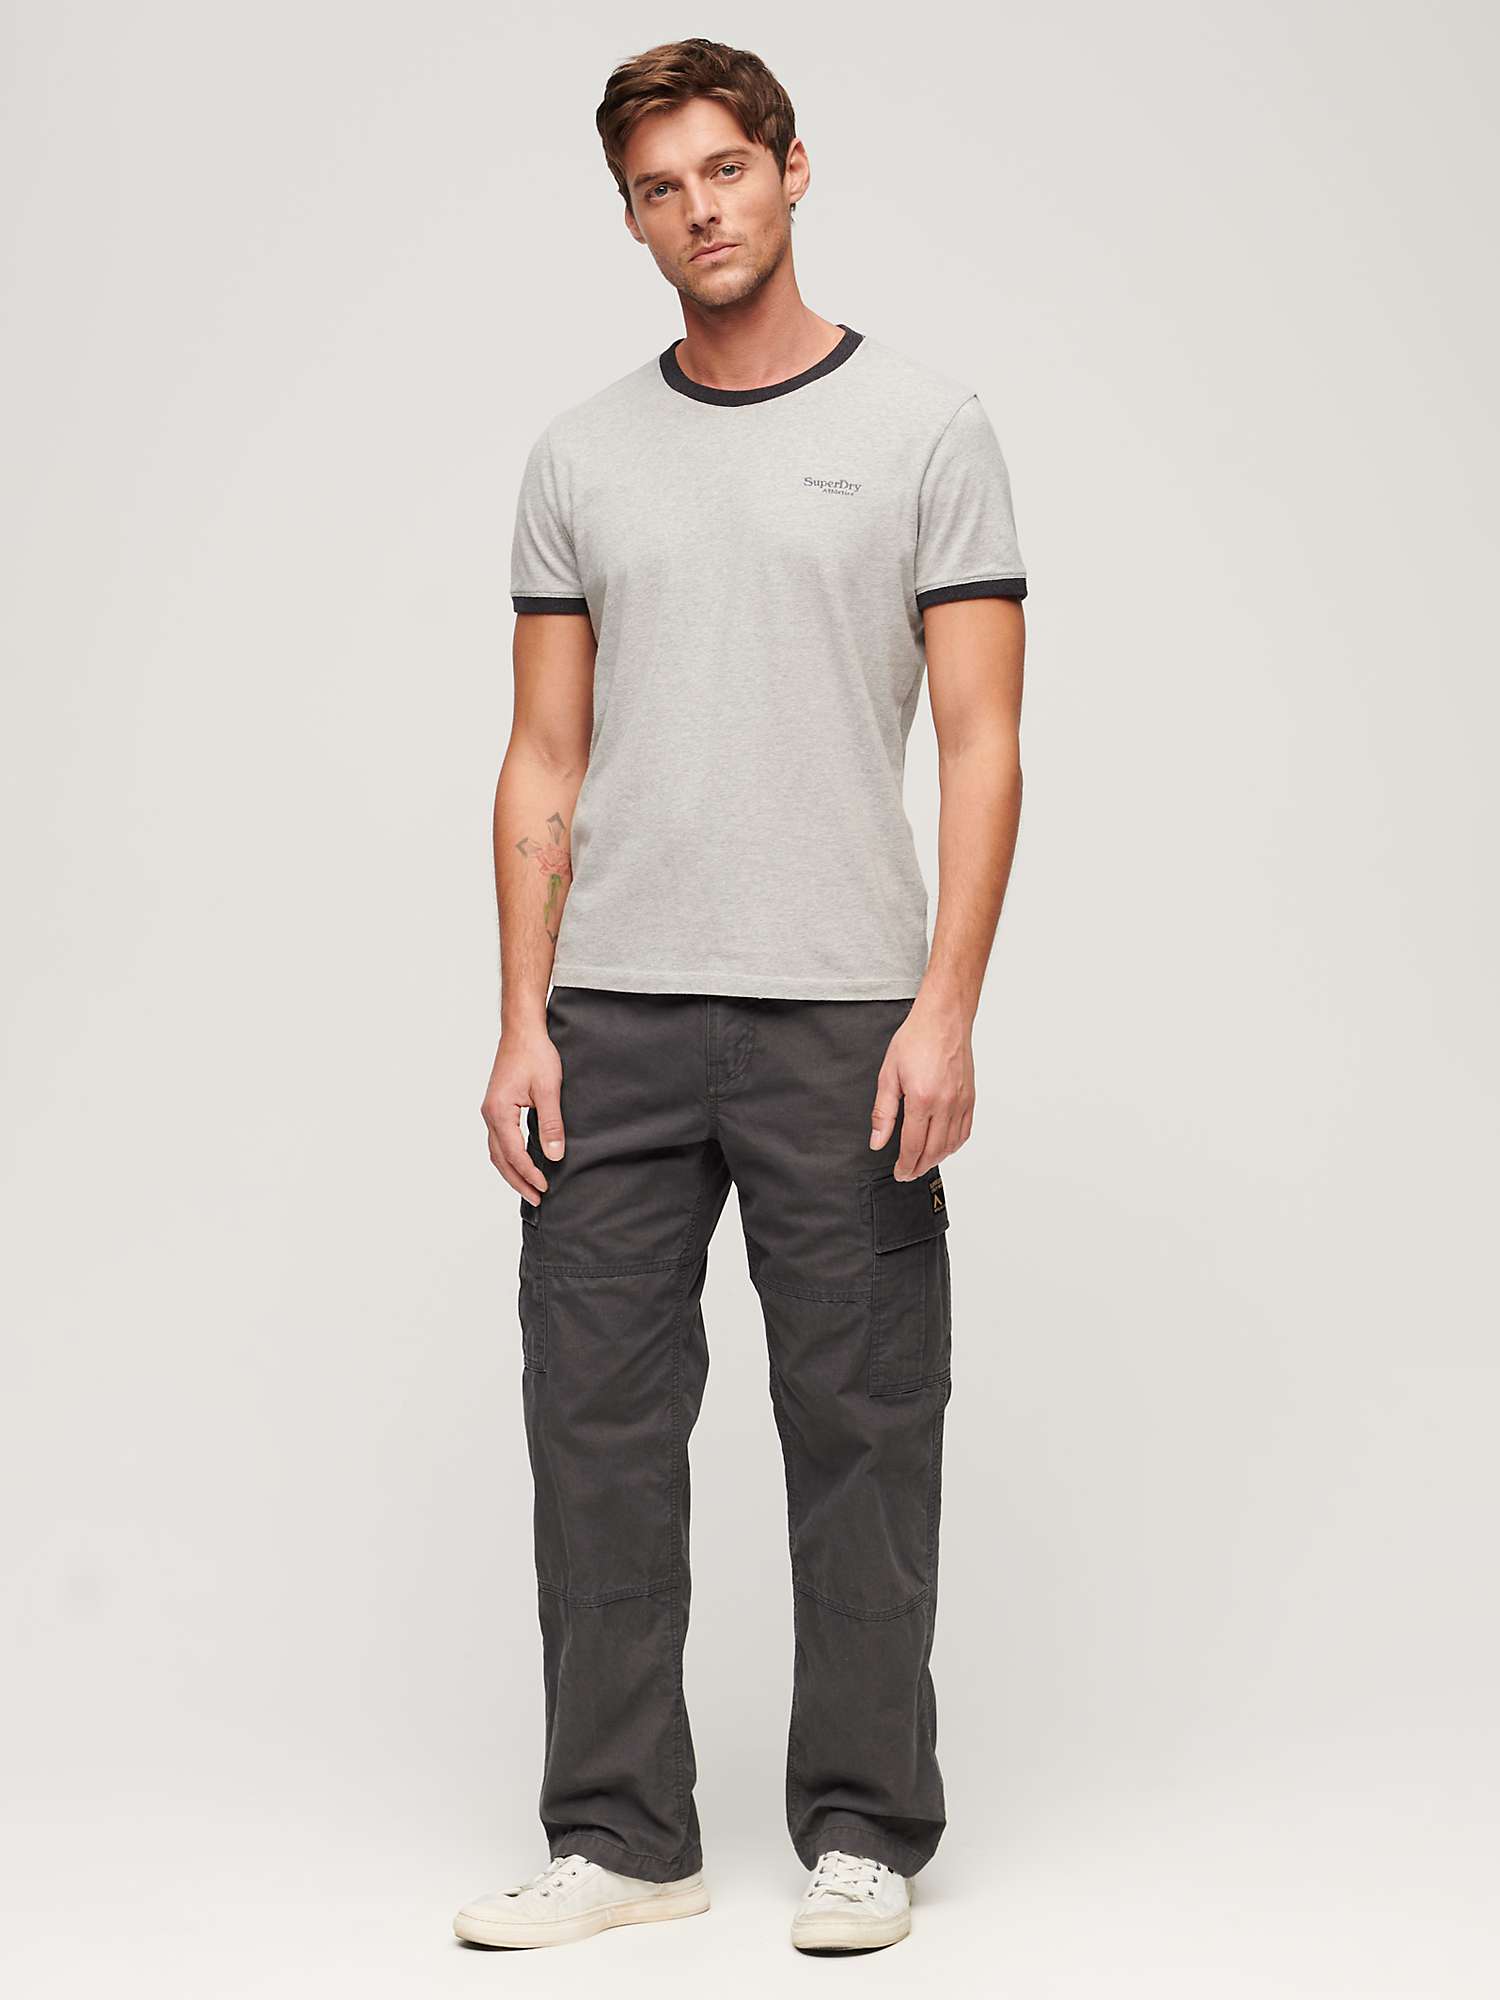 Buy Superdry Cotton Cargo Trousers, Black Online at johnlewis.com